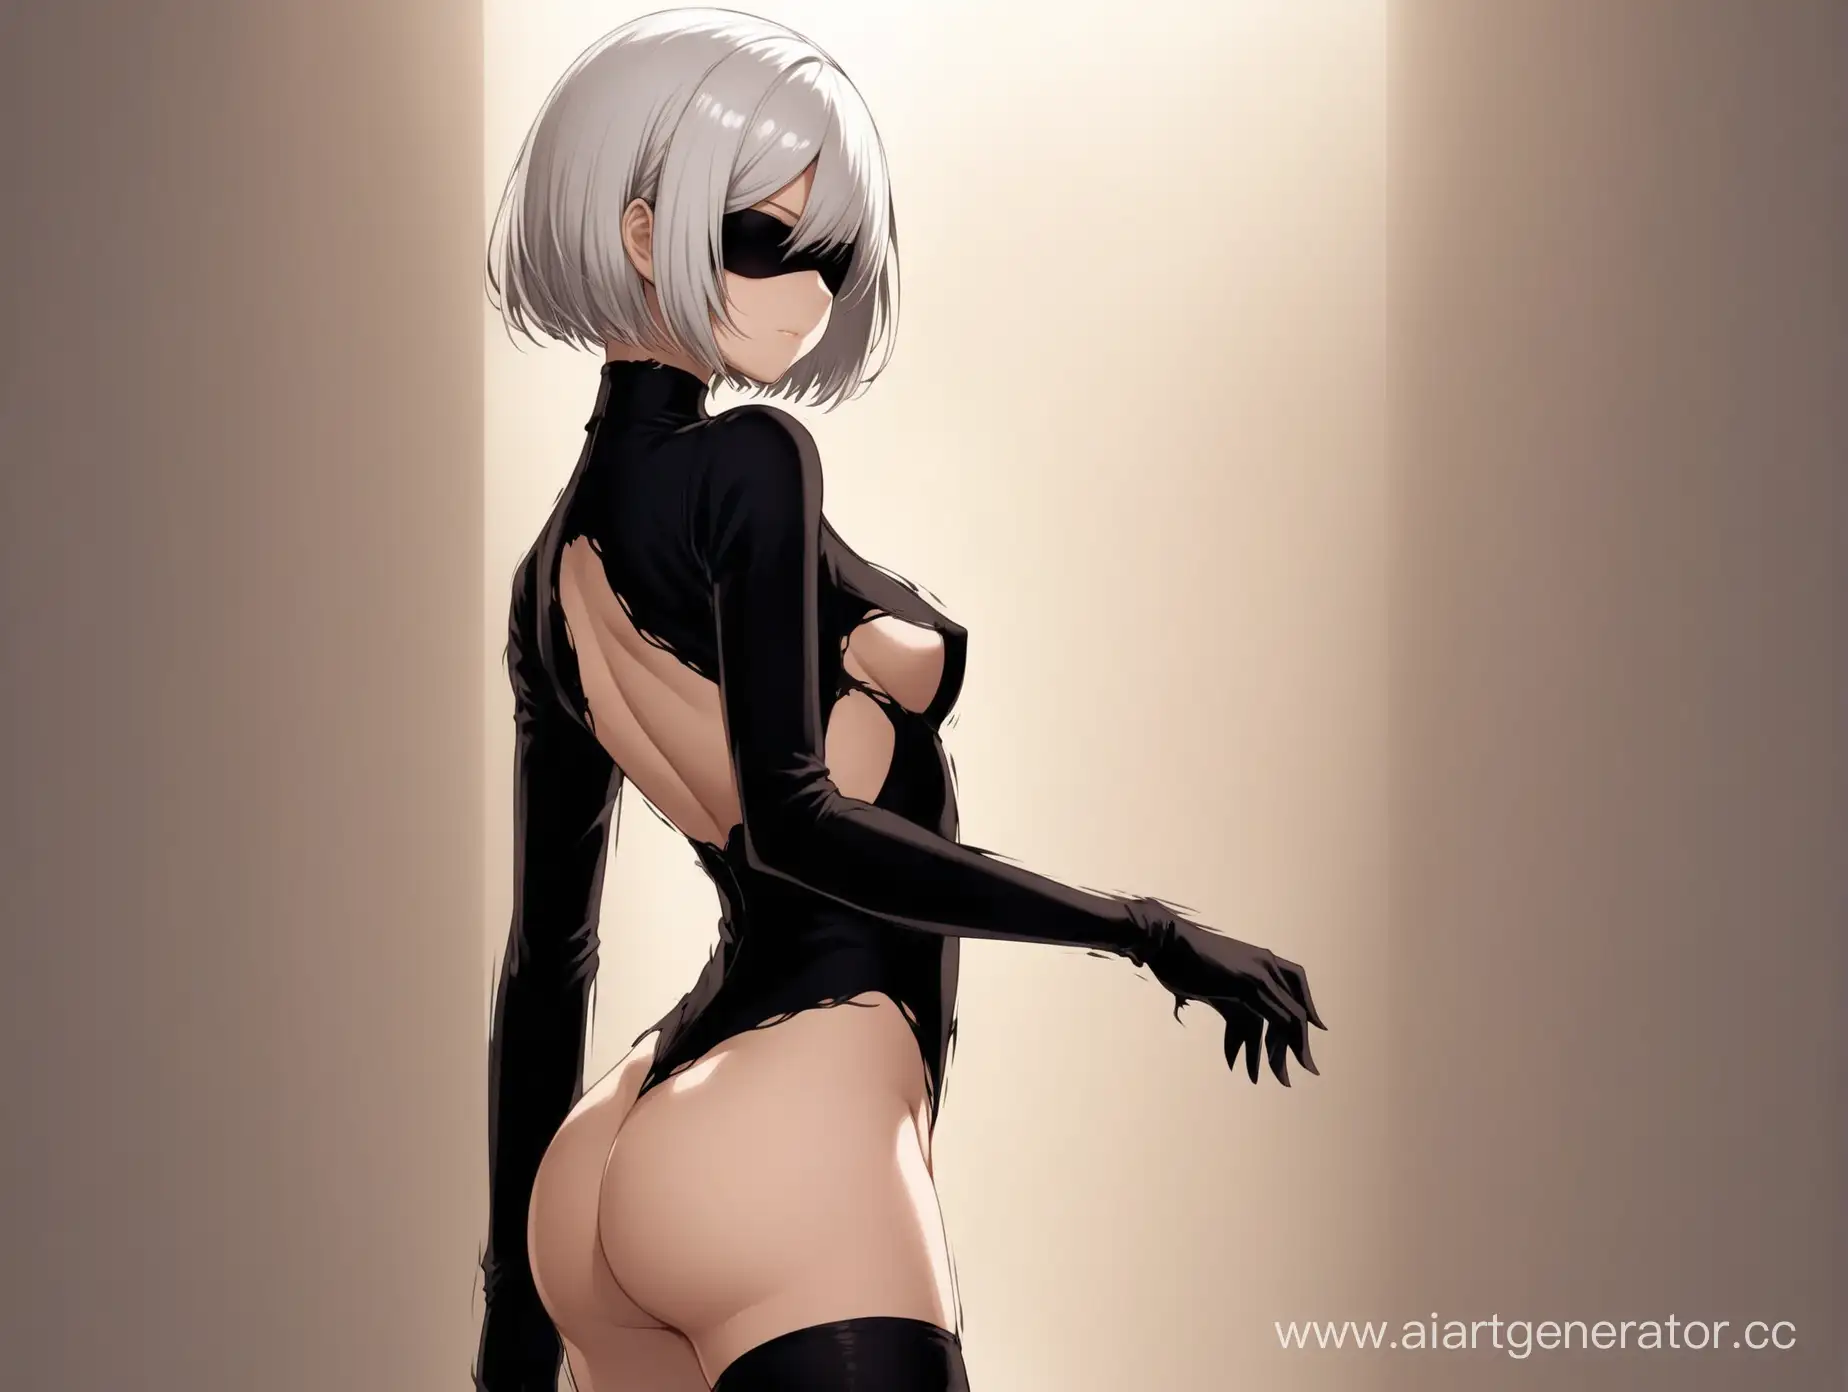 Elegant-Android-2B-from-NieR-Automata-in-a-Nude-Pose